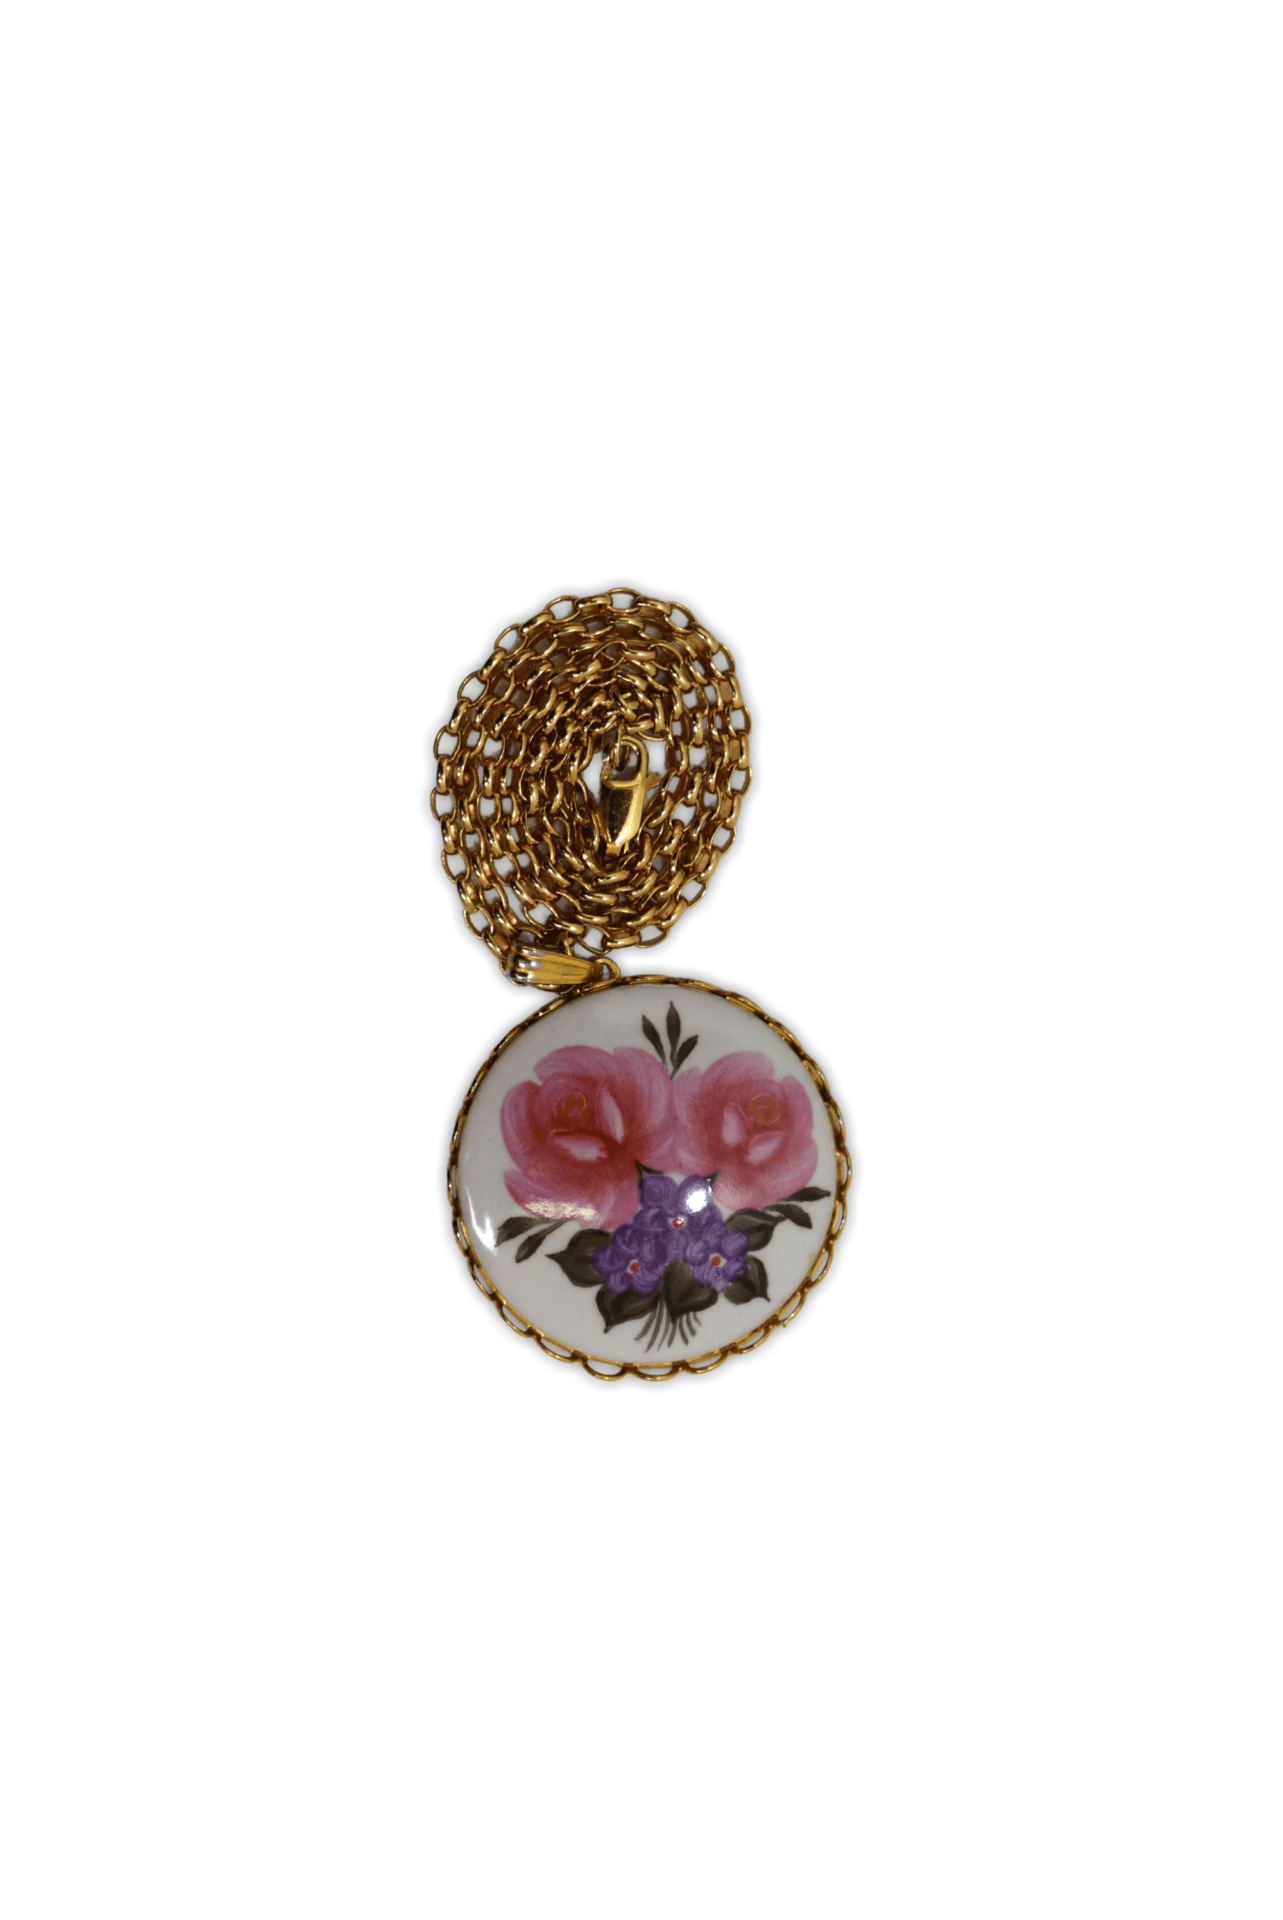 Thin gold chain with small hand painted floral pendant.